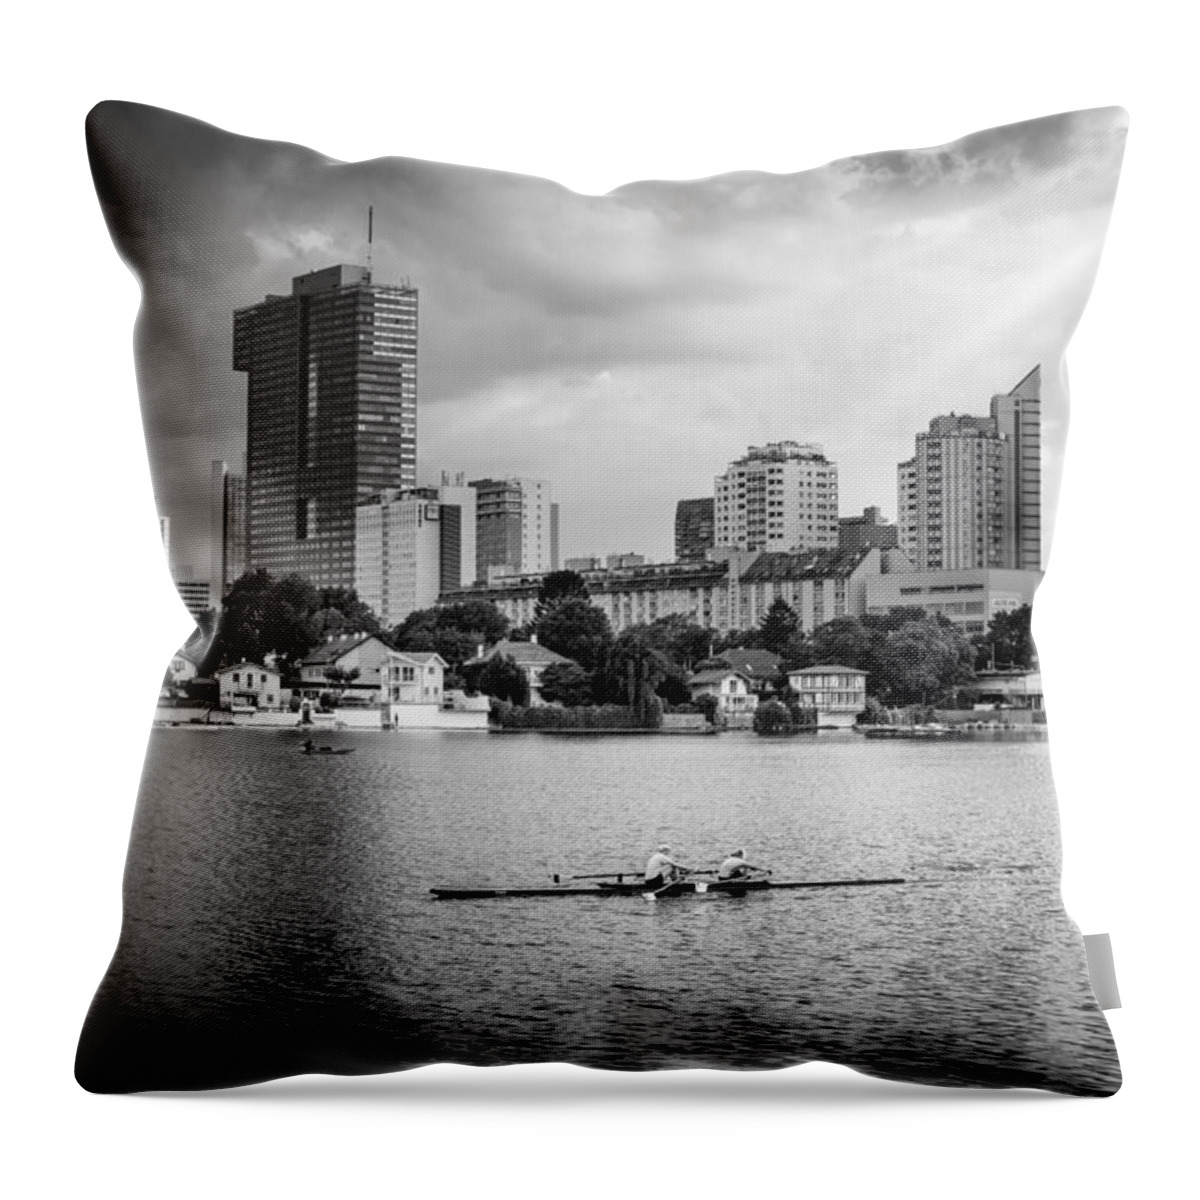 Skyline Throw Pillow featuring the photograph Rowing Boat And The Skyline Of Vienna by Andreas Berthold